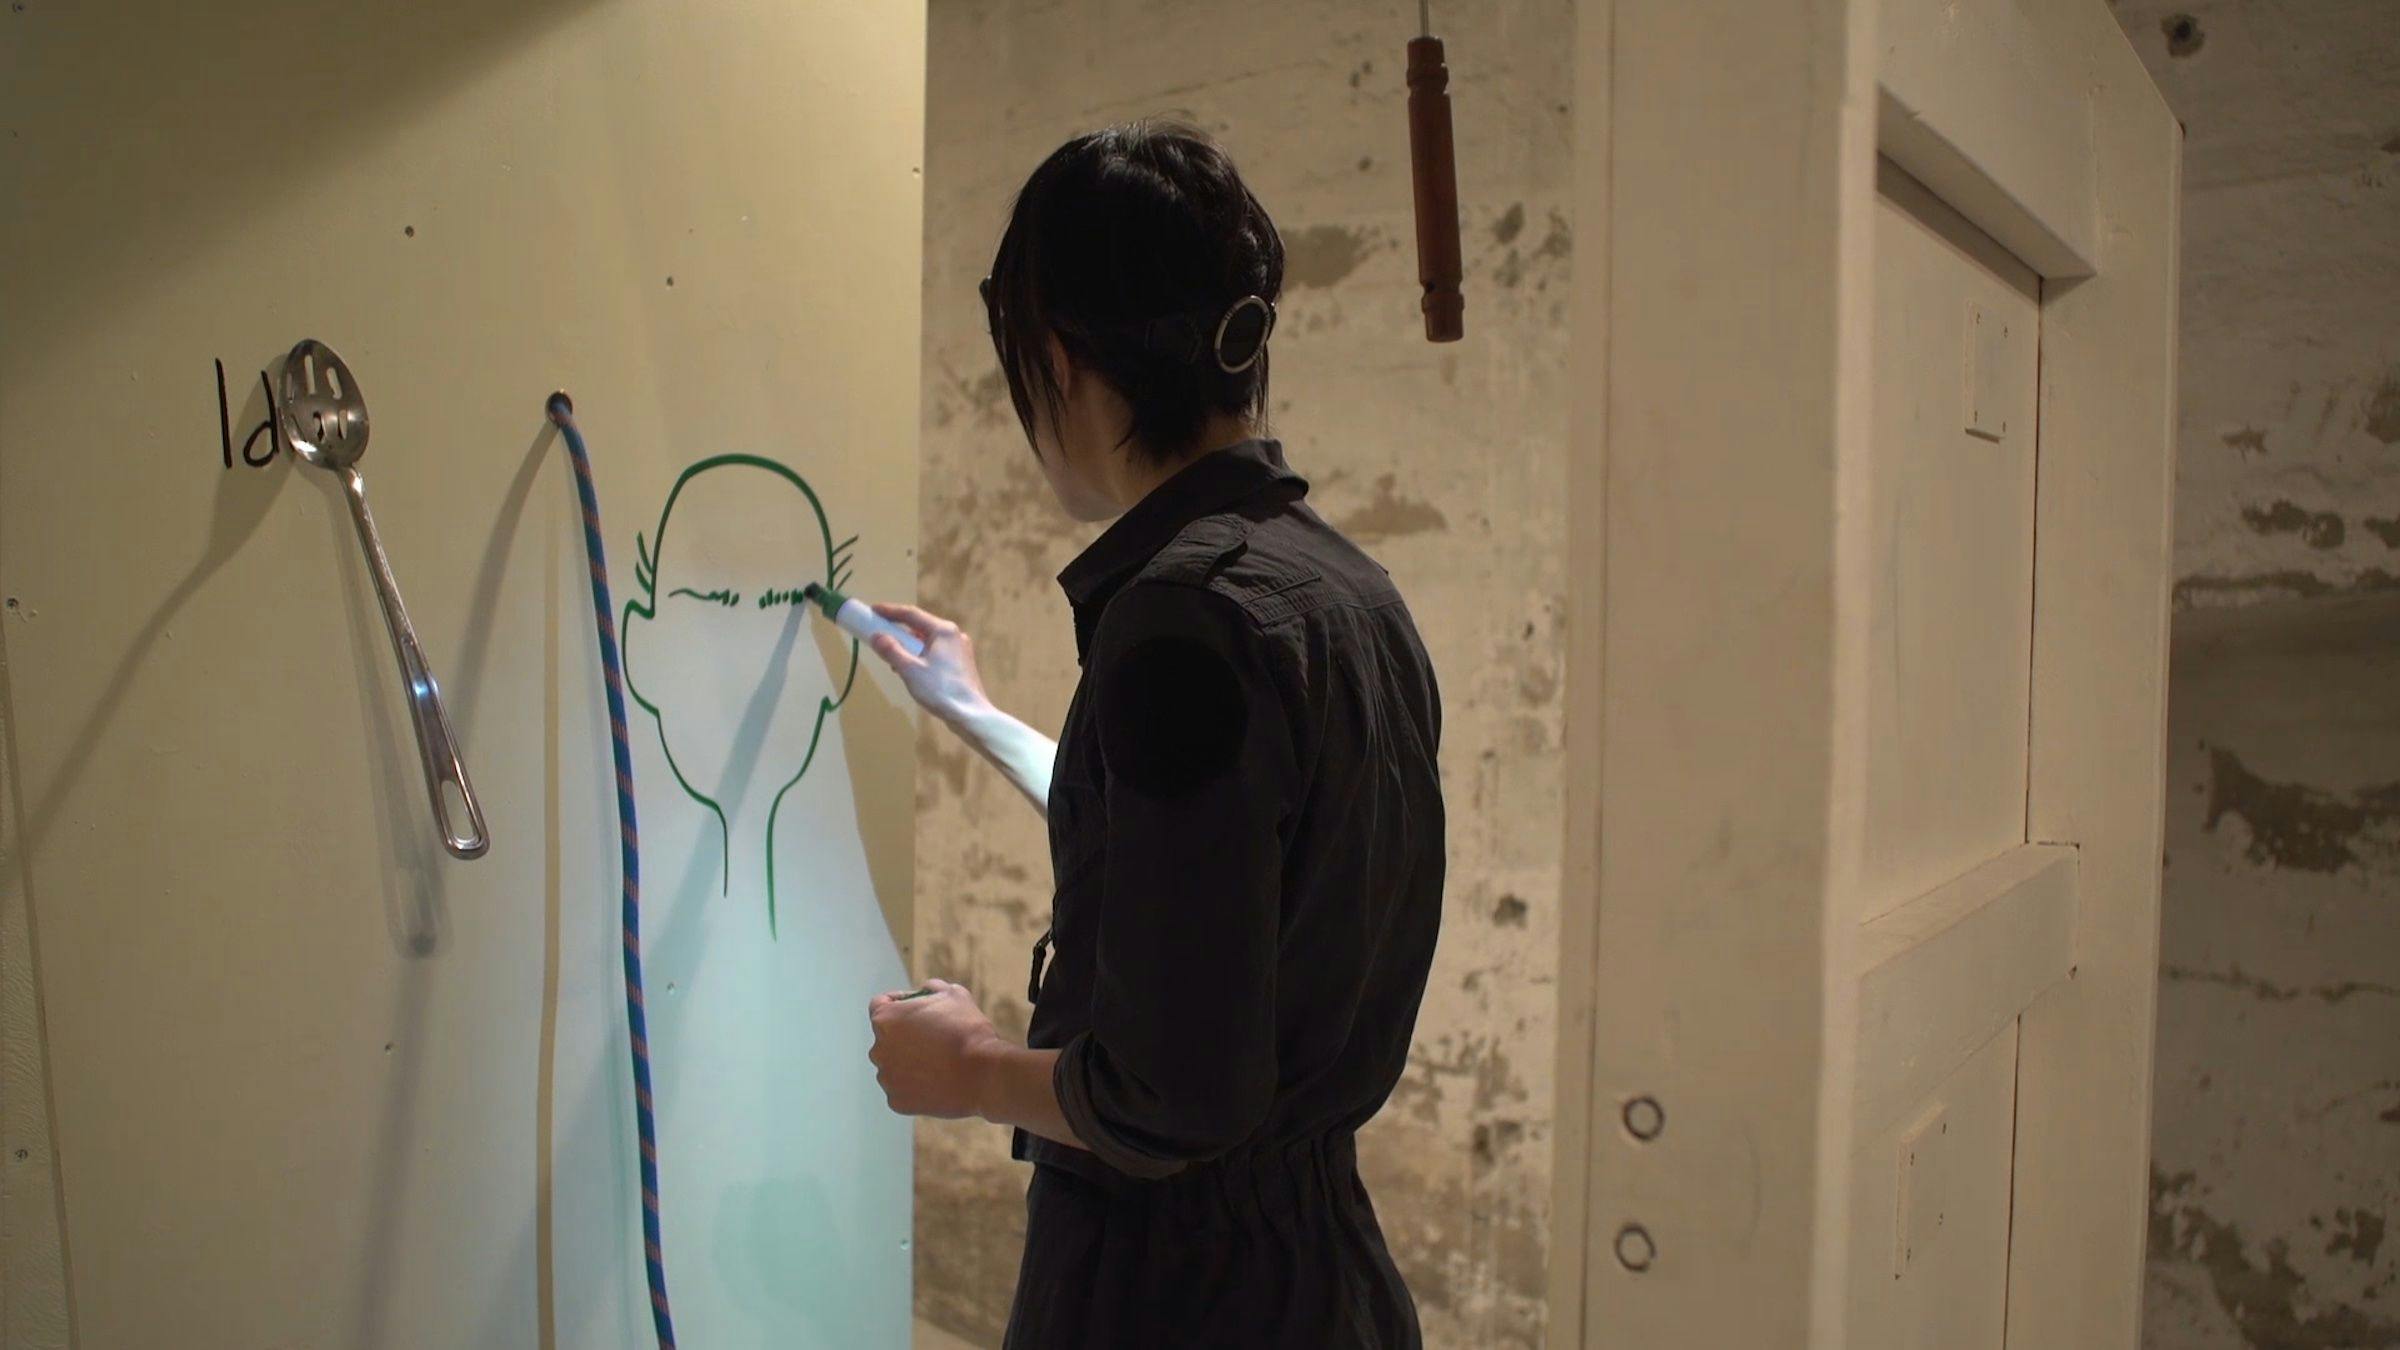 the artist drawing a face on a wall in a domestic space